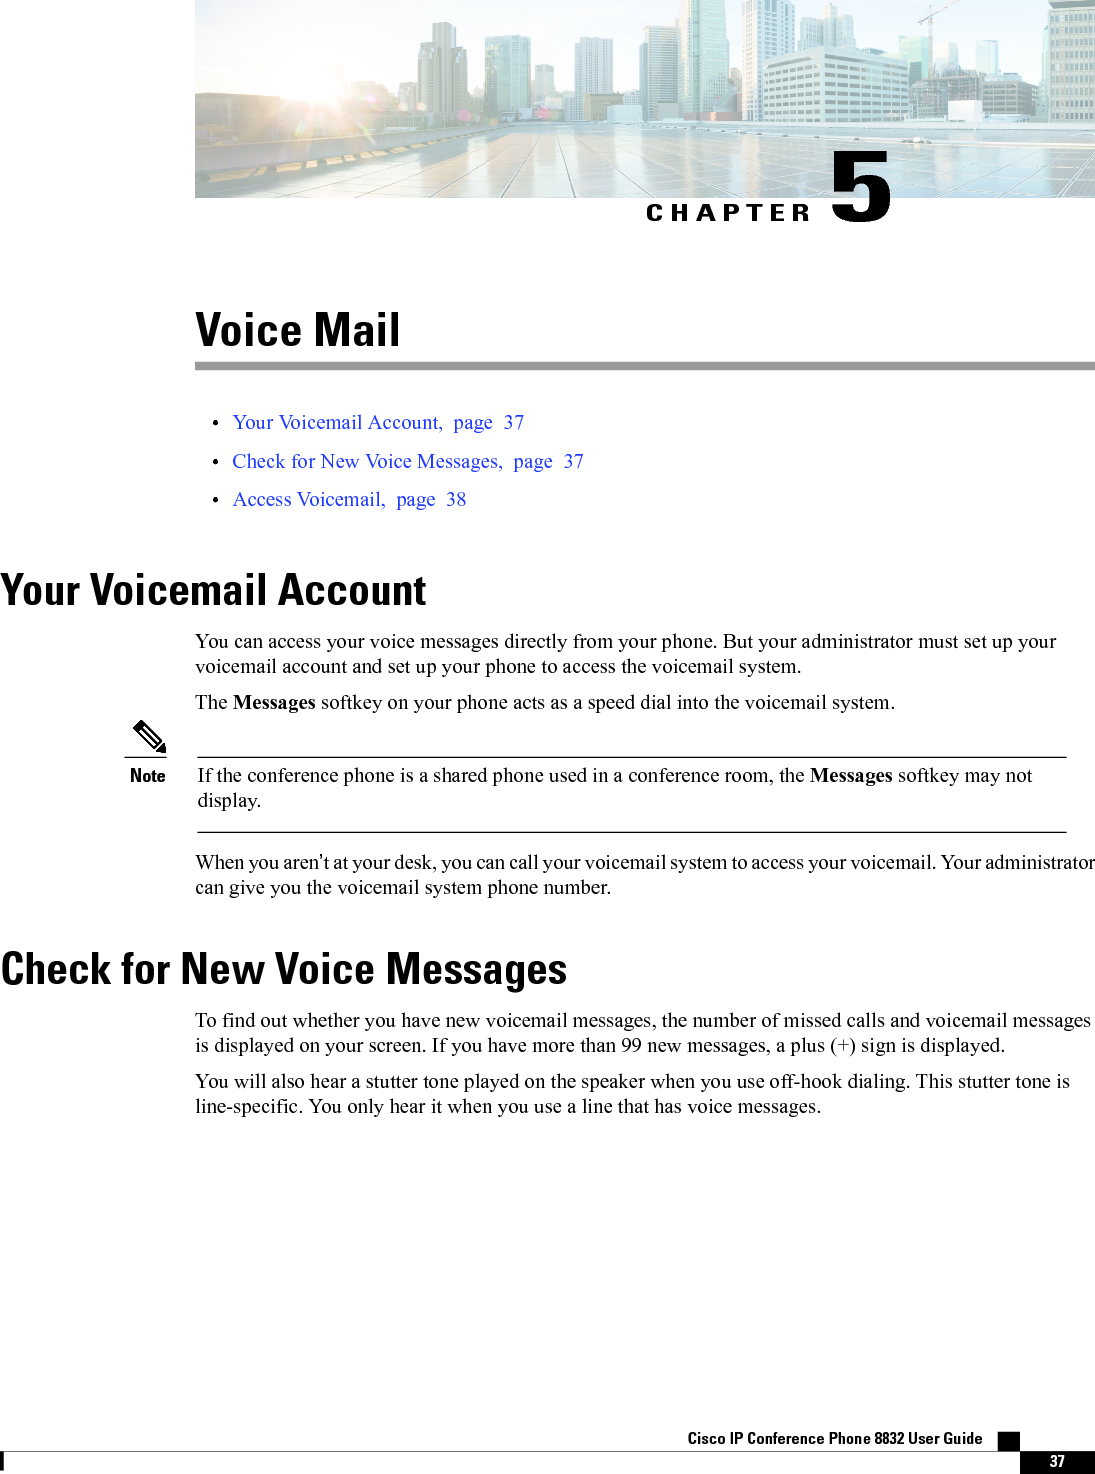 CHAPTER 5Voice Mail•Your Voicemail Account, page 37•Check for New Voice Messages, page 37•Access Voicemail, page 38Your Voicemail AccountYou can access your voice messages directly from your phone. But your administrator must set up yourvoicemail account and set up your phone to access the voicemail system.The Messages softkey on your phone acts as a speed dial into the voicemail system.If the conference phone is a shared phone used in a conference room, the Messages softkey may notdisplay.NoteWhen you aren’t at your desk, you can call your voicemail system to access your voicemail. Your administratorcan give you the voicemail system phone number.Check for New Voice MessagesTo find out whether you have new voicemail messages, the number of missed calls and voicemail messagesis displayed on your screen. If you have more than 99 new messages, a plus (+) sign is displayed.You will also hear a stutter tone played on the speaker when you use off-hook dialing. This stutter tone isline-specific. You only hear it when you use a line that has voice messages.Cisco IP Conference Phone 8832 User Guide    37